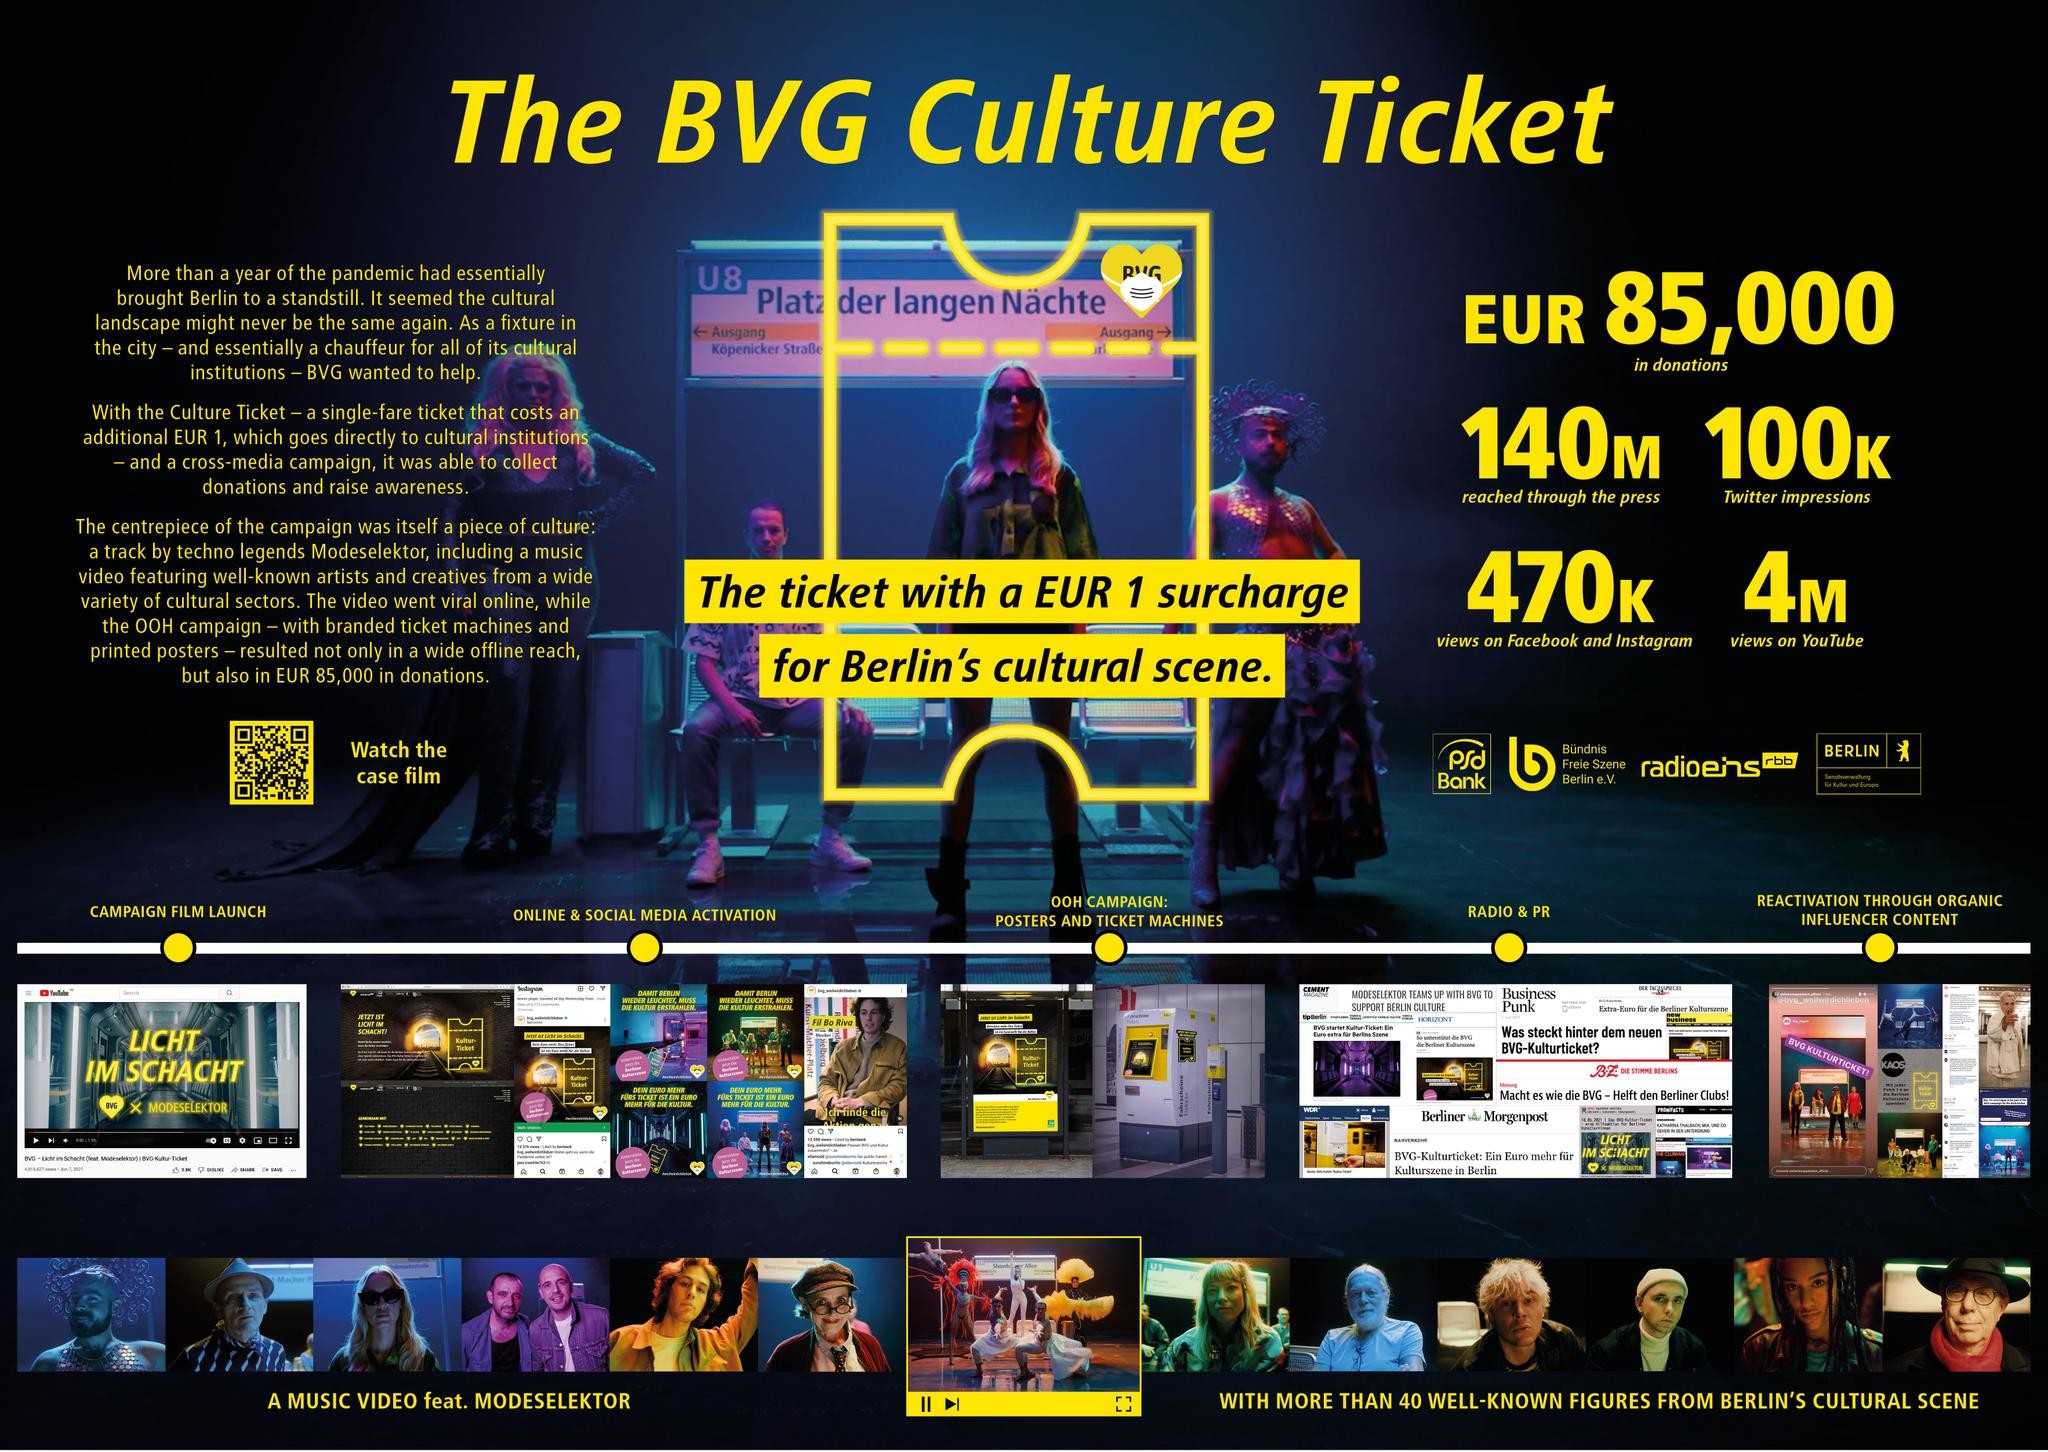 The BVG Culture Ticket